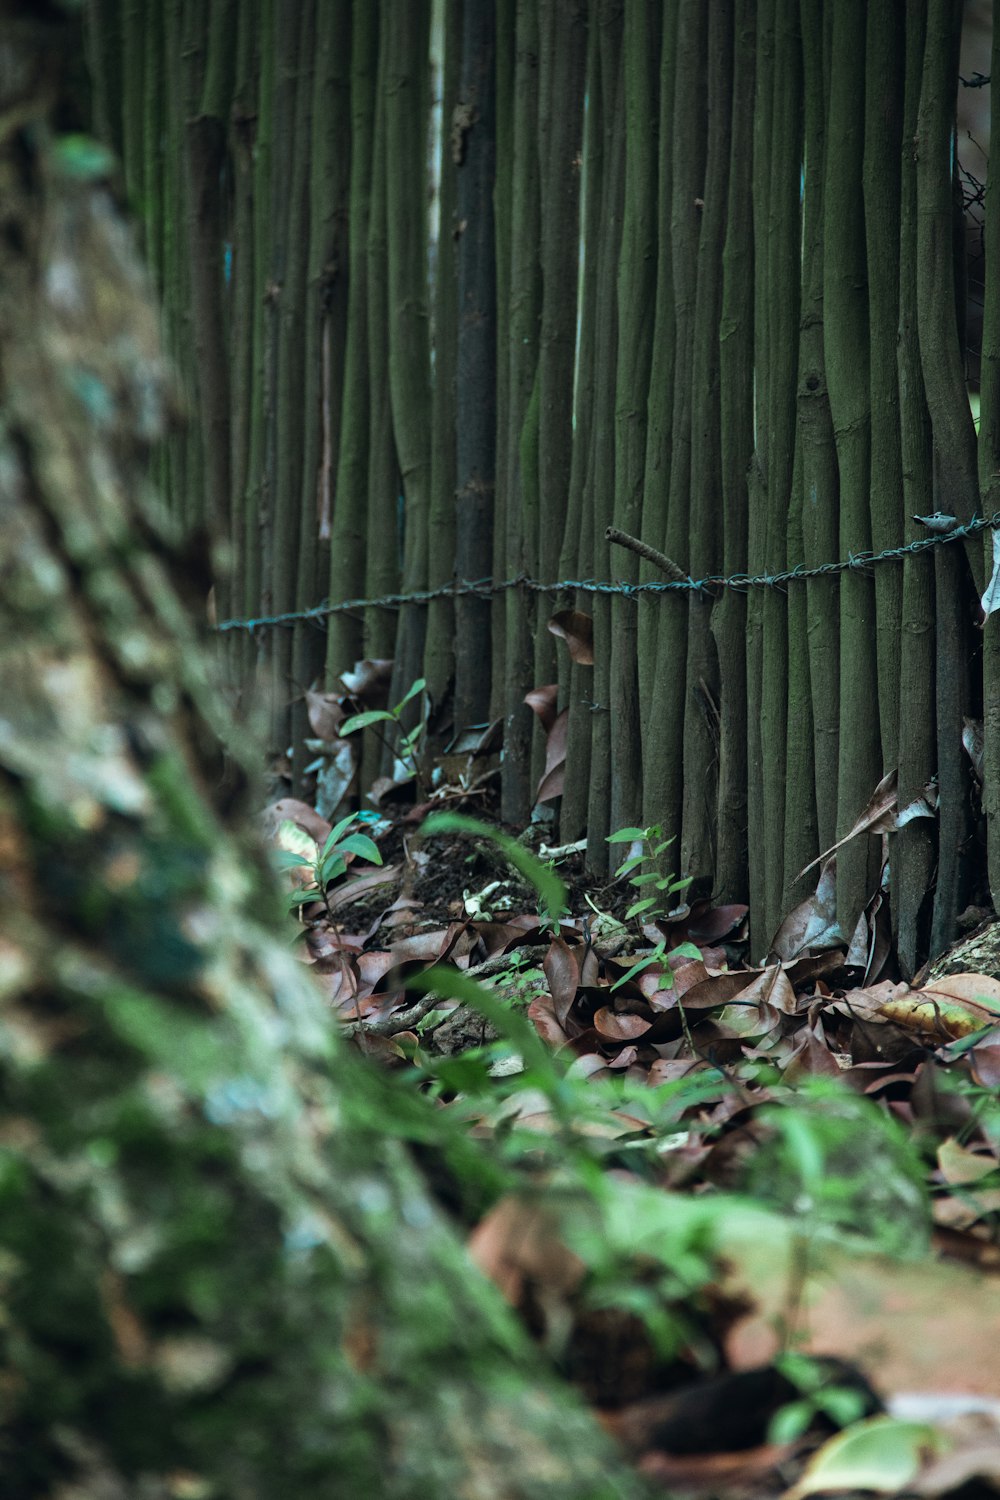 a fence made of bamboo sticks in a forest